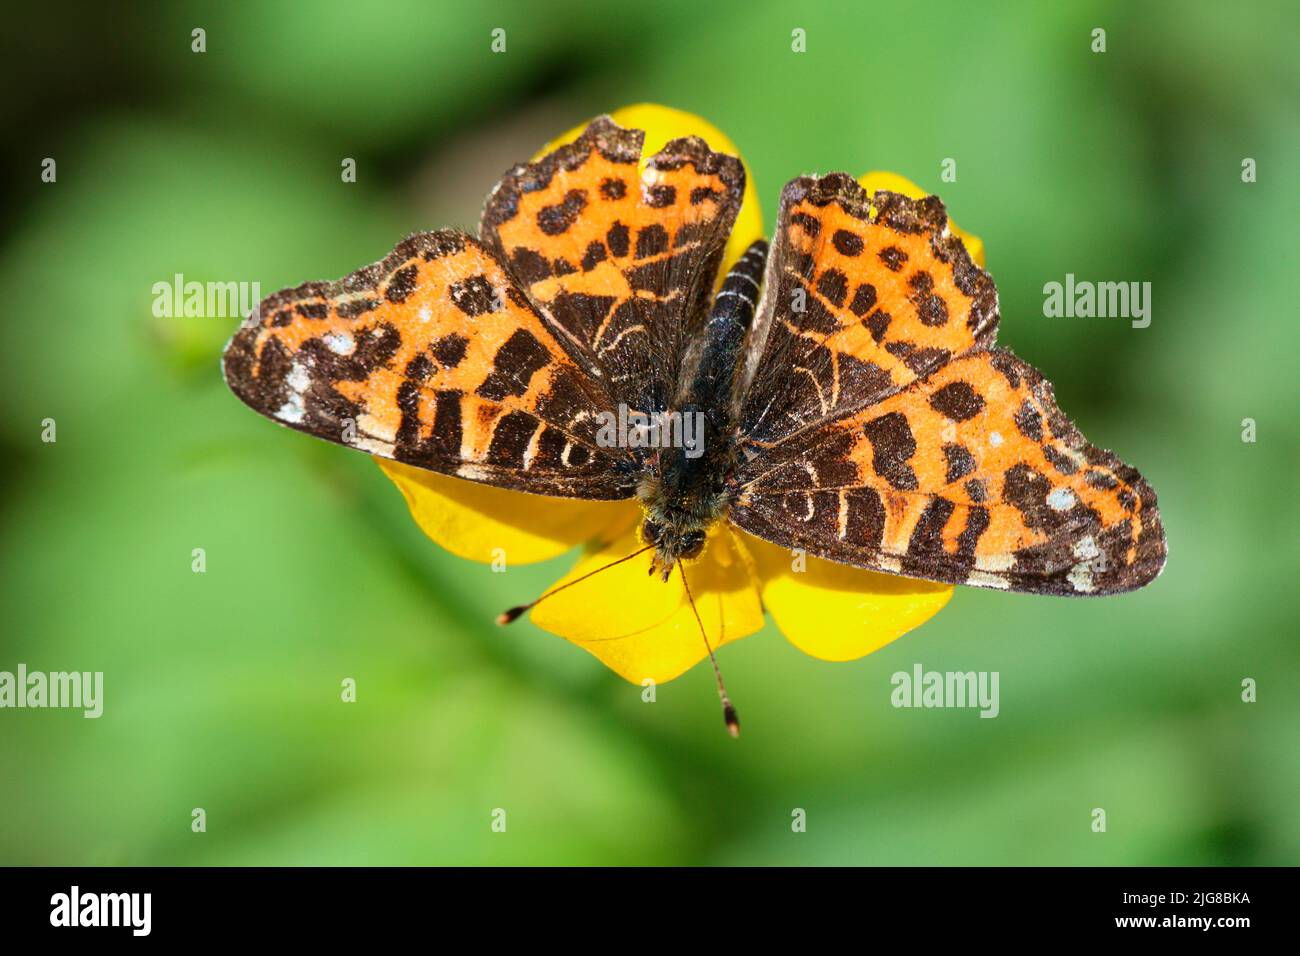 Summer form of the map butterfly (Araschnia levana) on creeping buttercup Stock Photo